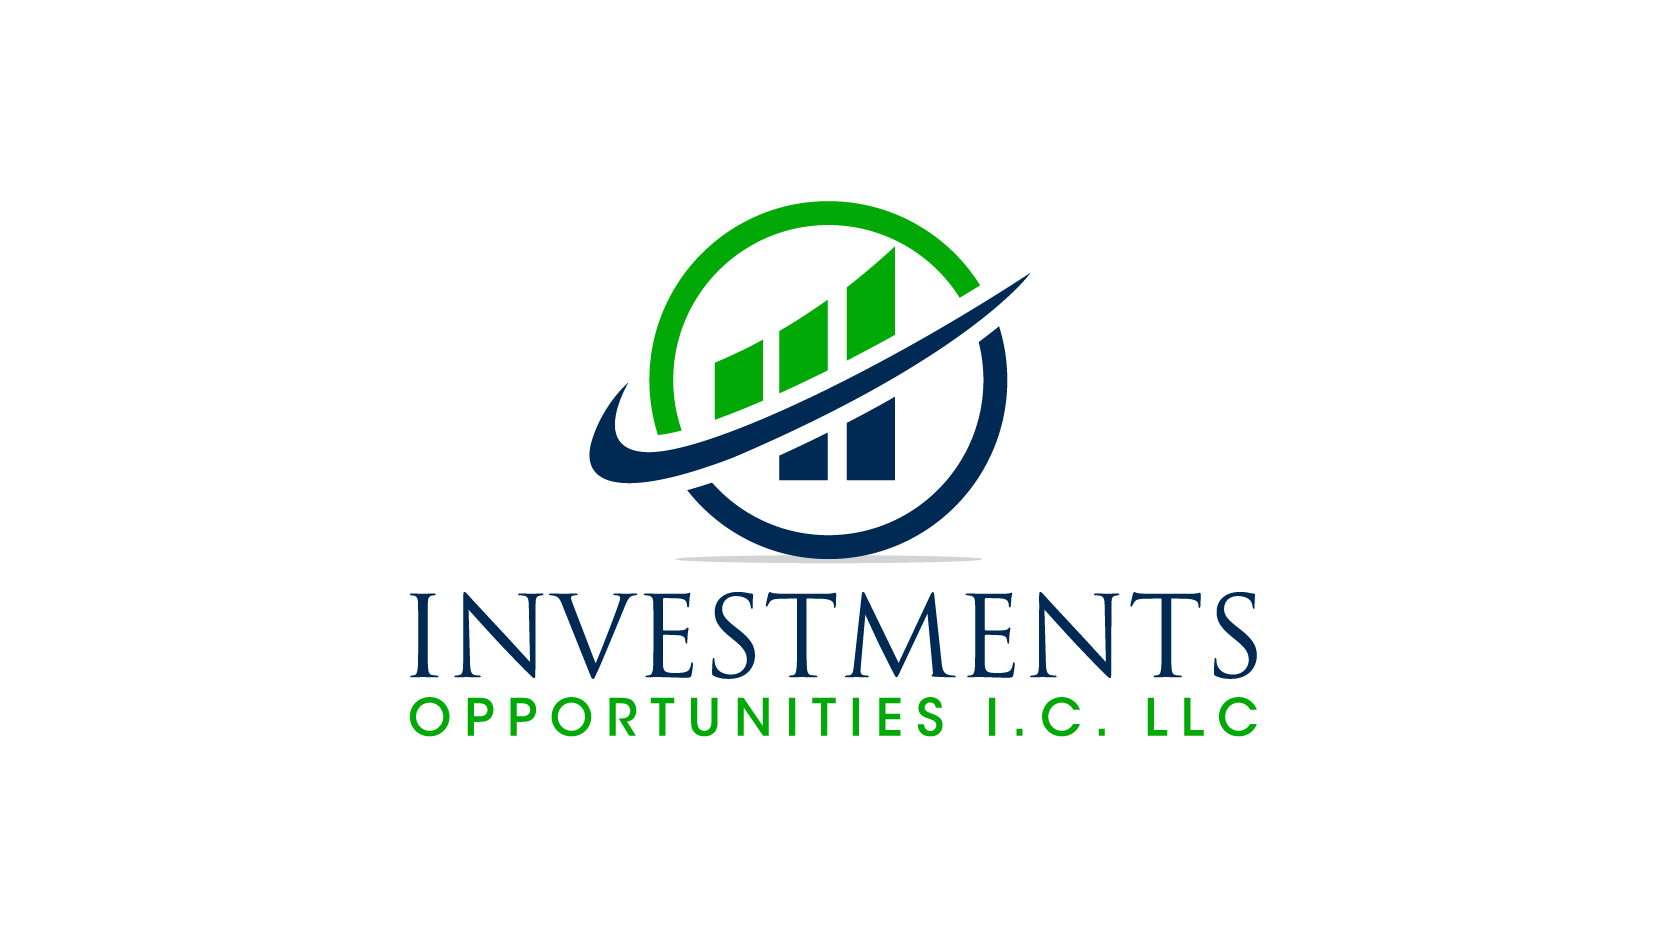 Investment Logo - Investment company Logos